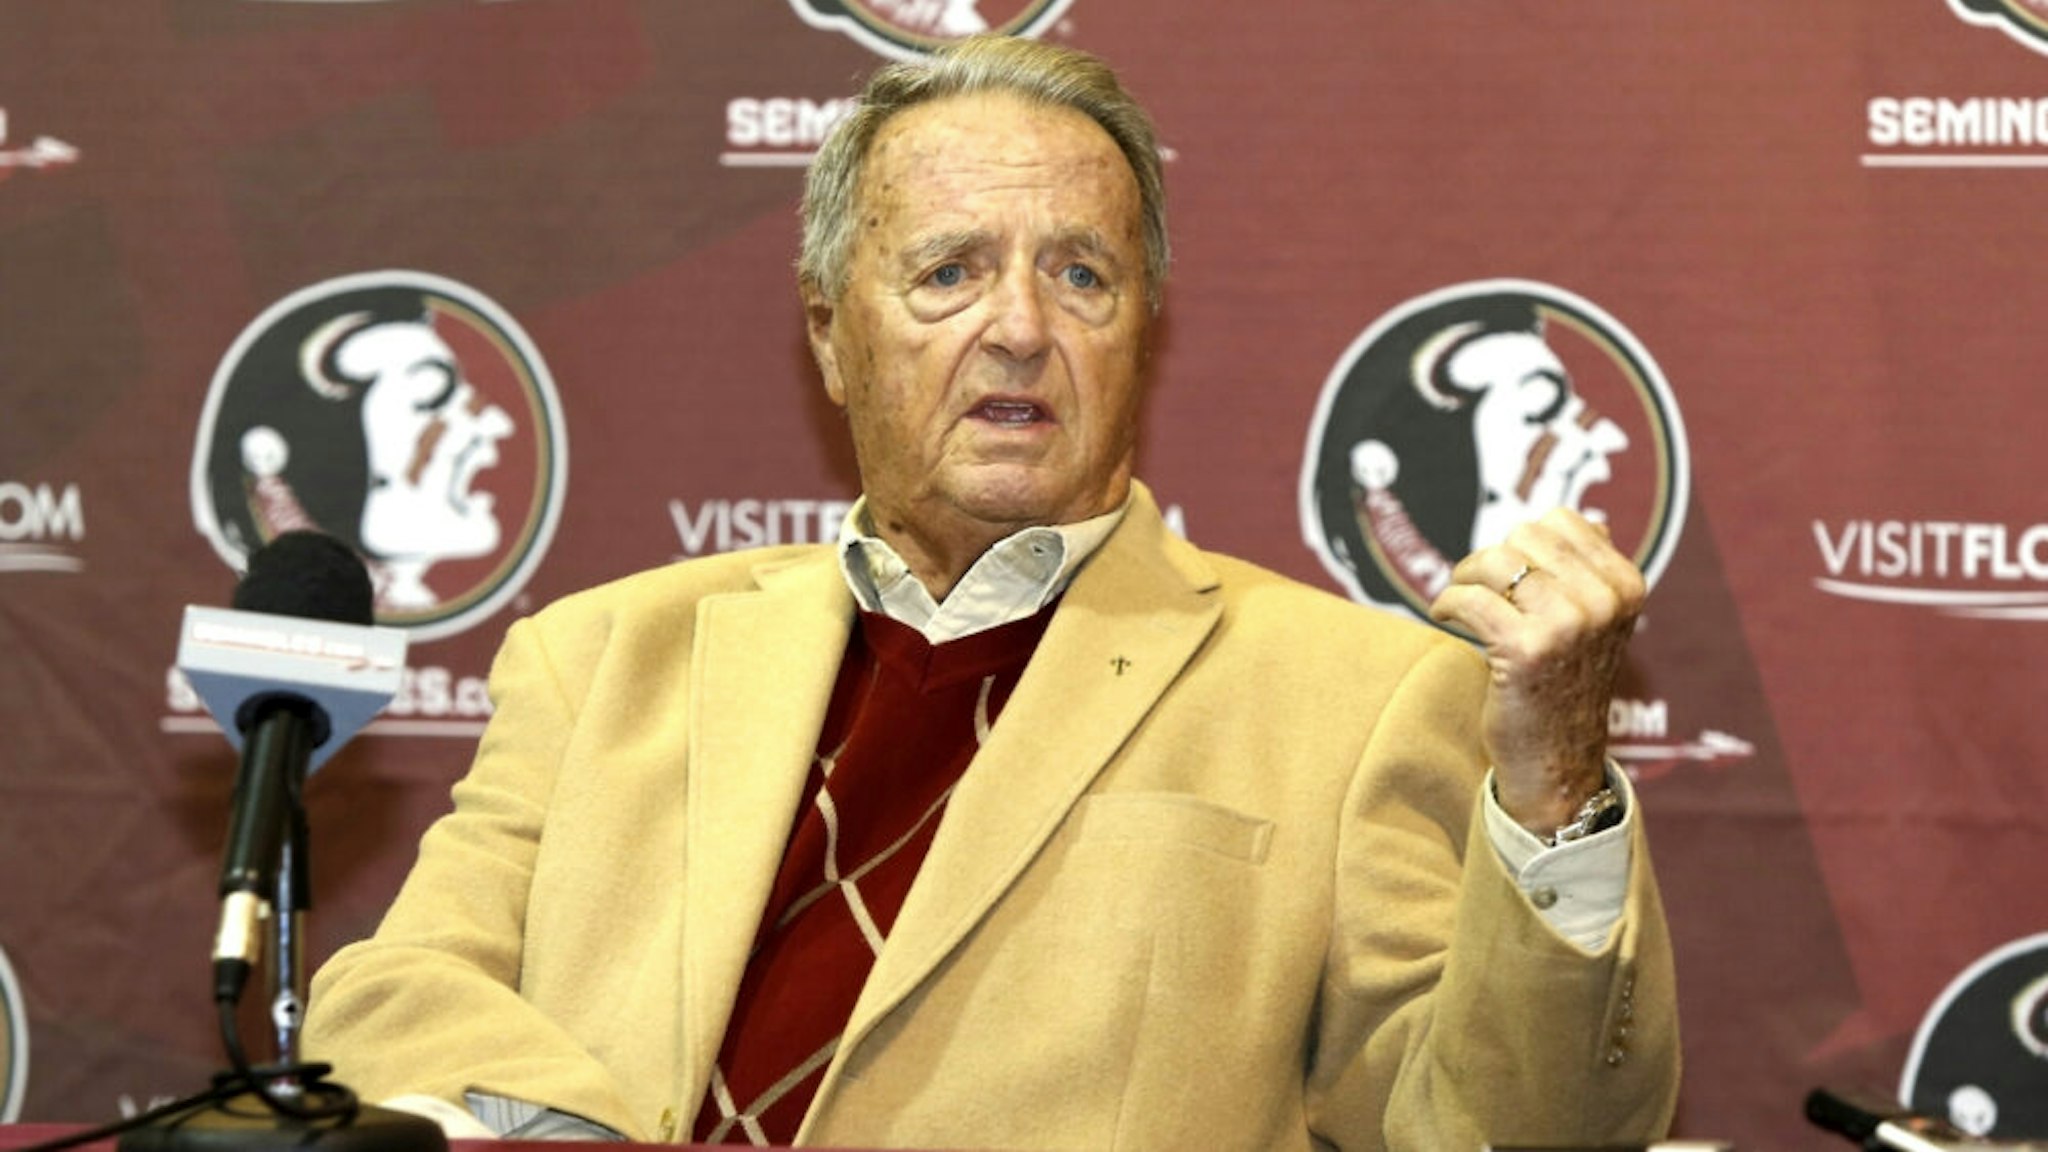 TALLAHASSEE, FL - OCTOBER 26: Former Florida State Head Coach Bobby Bowden speaks during a press conference before the game against North Carolina State Wolfpack at Bobby Bowden Field at Doak Campbell Stadium on October 26, 2013 in Tallahassee, Florida. Bowden, who coached the Seminoles from 1976-2009 is the all-time leader in coaching victories in FBS with 377 wins. The 3rd ranked Florida State Seminoles defeated North Carolina State Wolfpack 49-17.